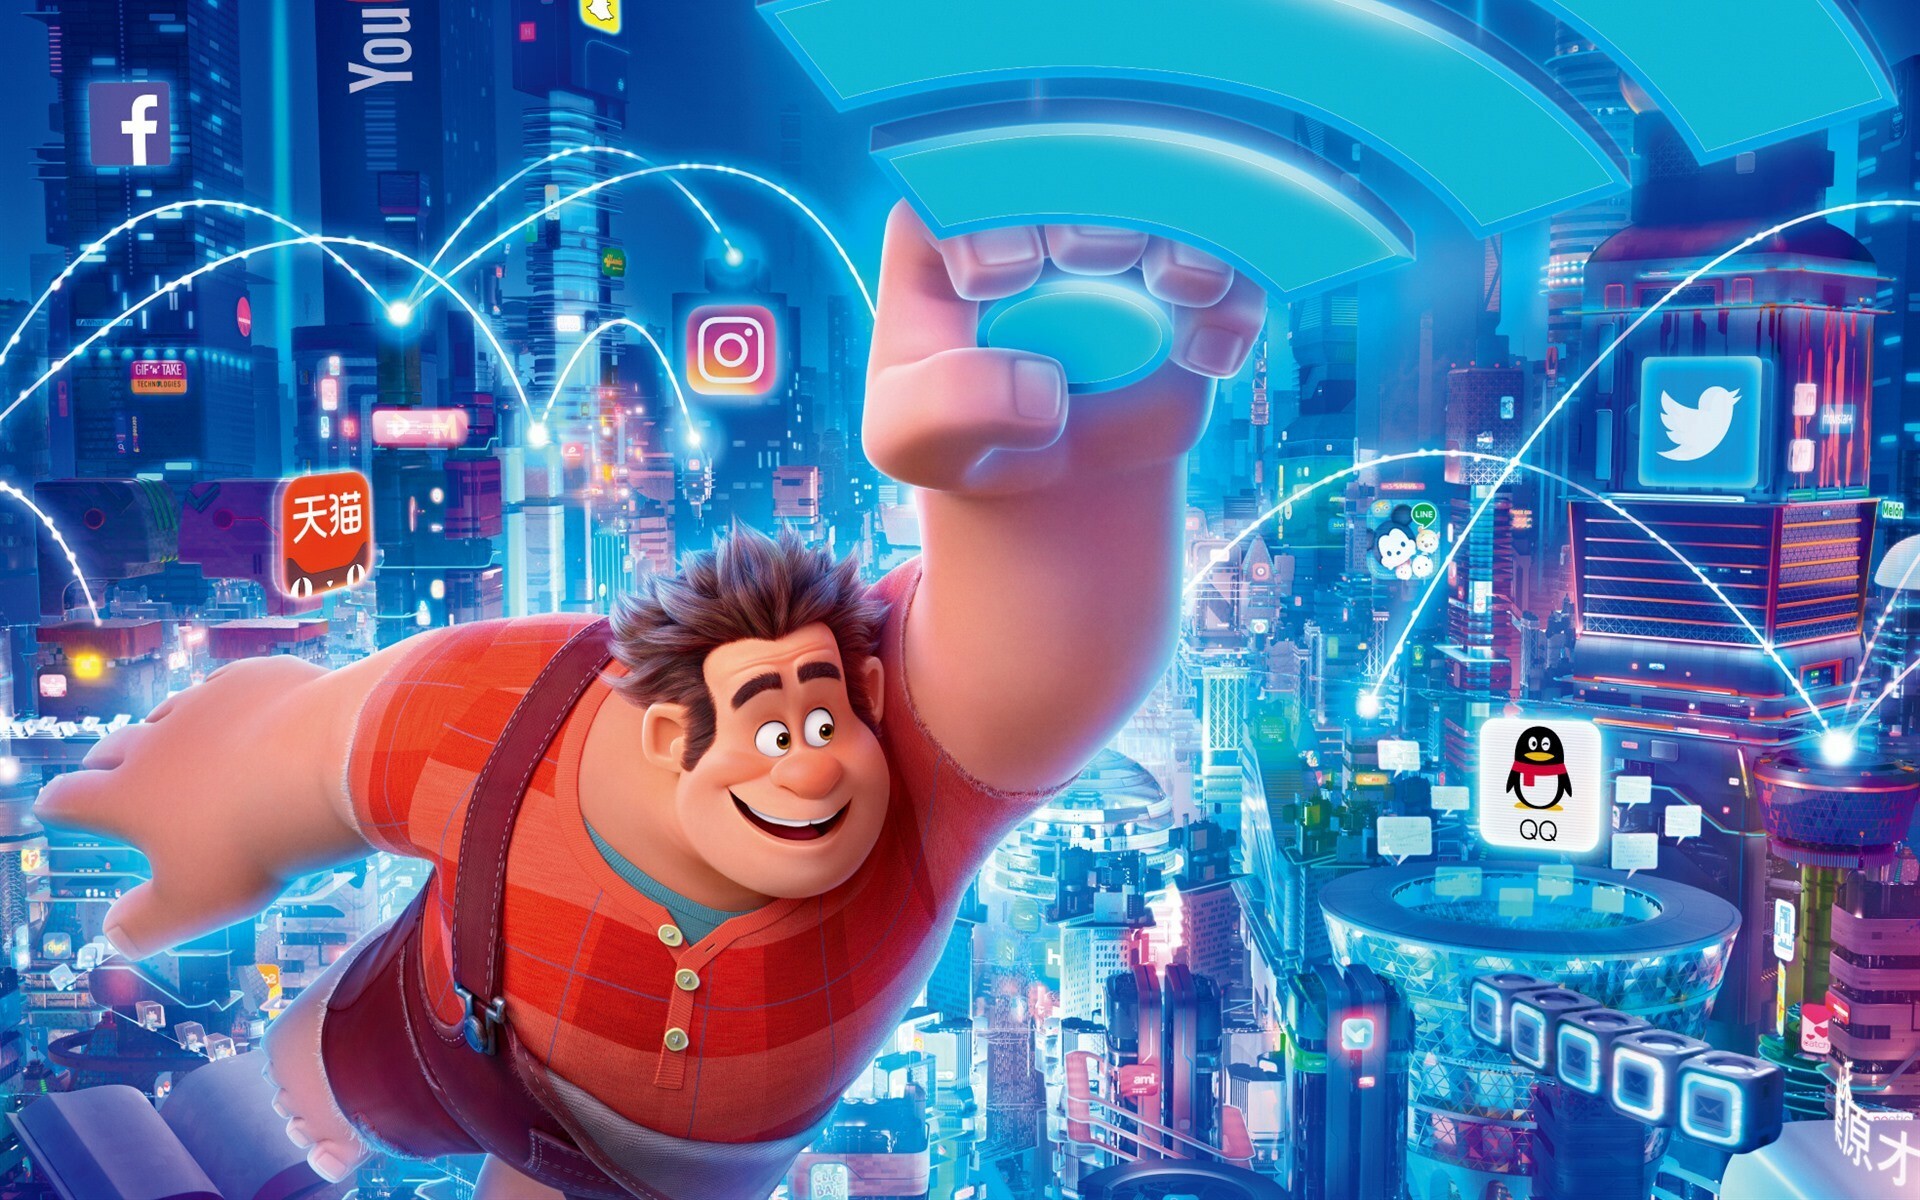 Wreck-It Ralph: The titular protagonist of Disney's 2012 animated feature film of the same name and its 2018 sequel. 1920x1200 HD Background.